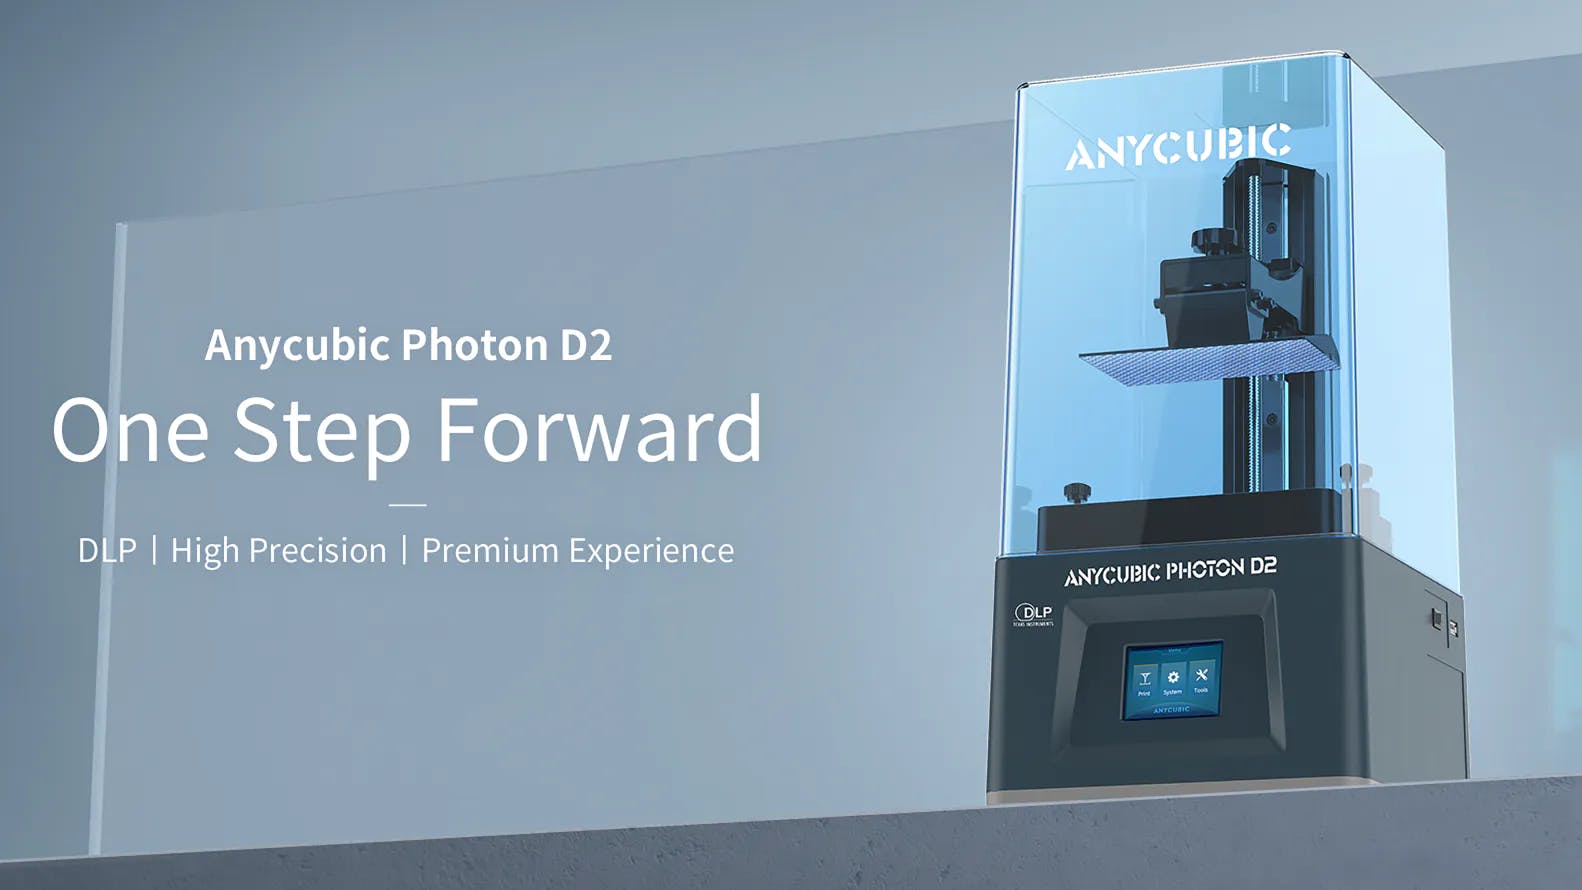 Just Cool Tech: Anycubic Photon D2 + AirPure Review